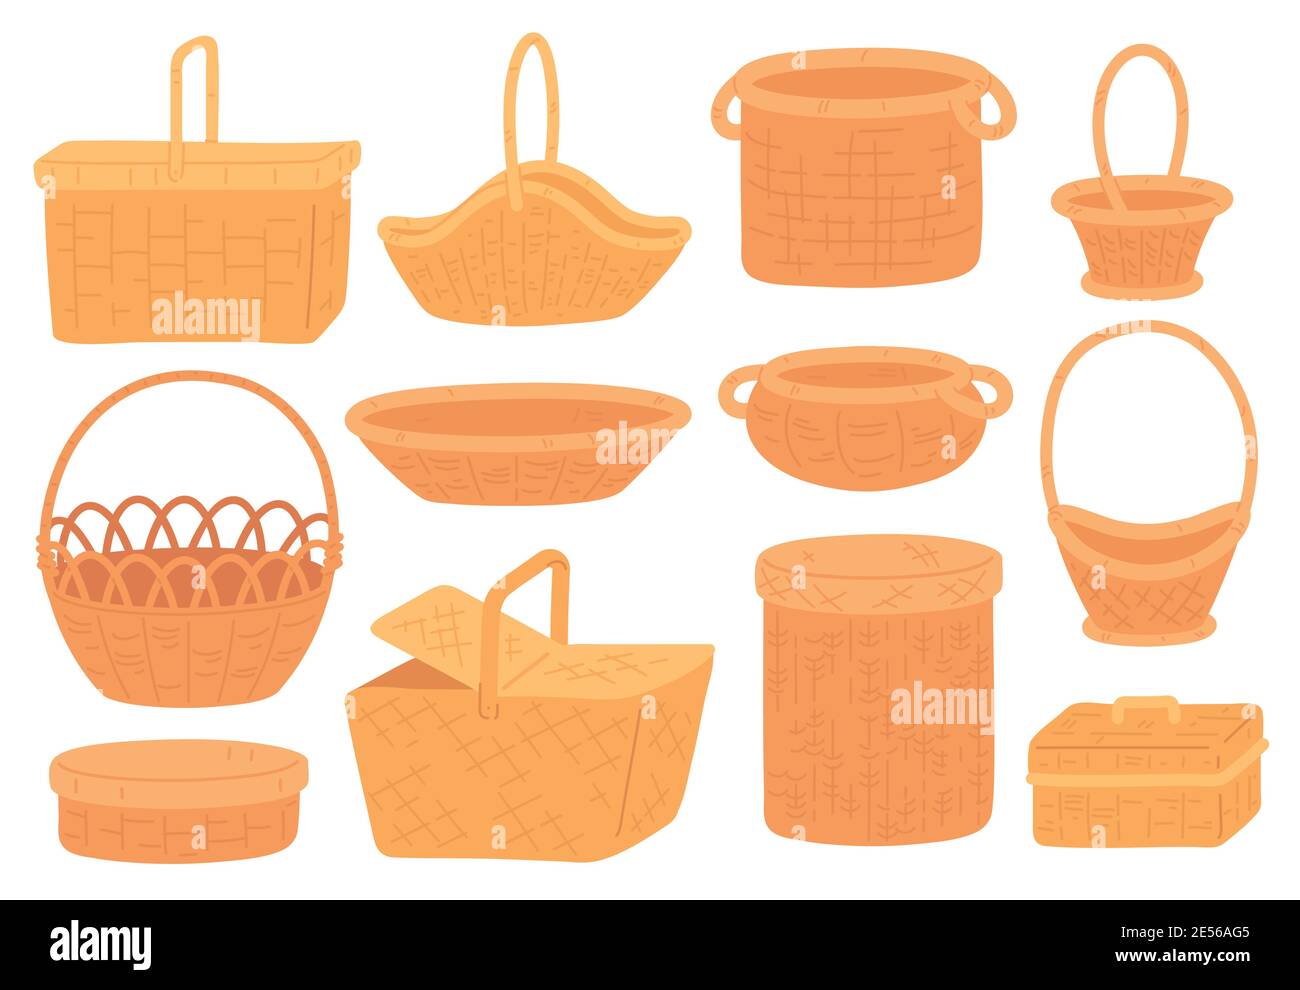 Wicker baskets. Empty straw basket for picnic, grocery or gift. Handmade round bamboo hamper and box. Trendy flat rattan basketry vector set Stock Vector